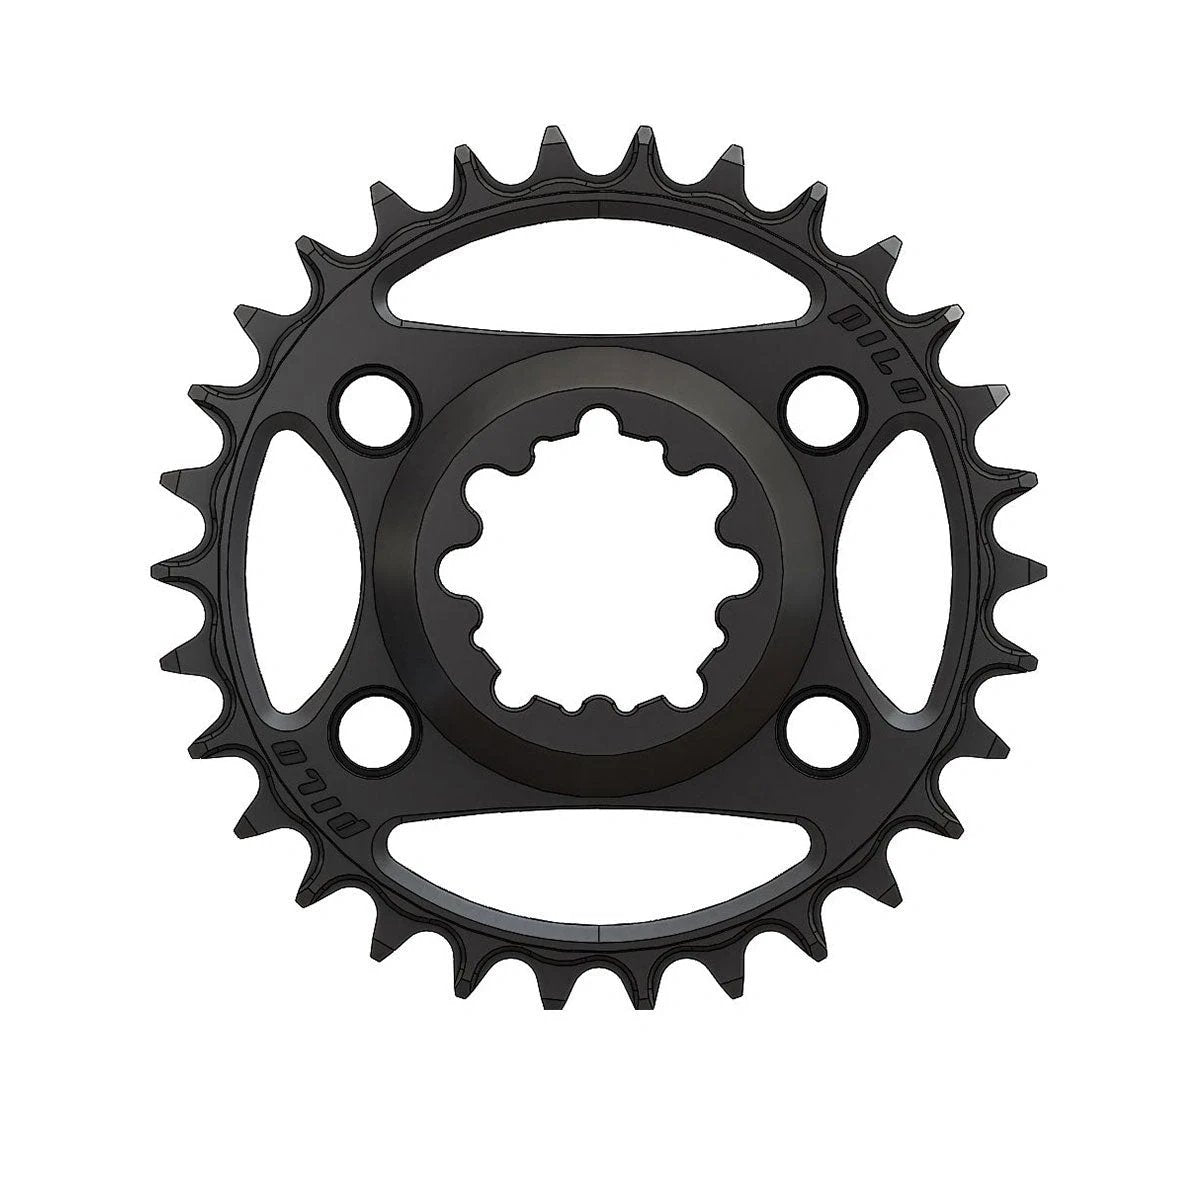 Pilo 30T Chainring For Sram Cranks - Replacement Chainrings